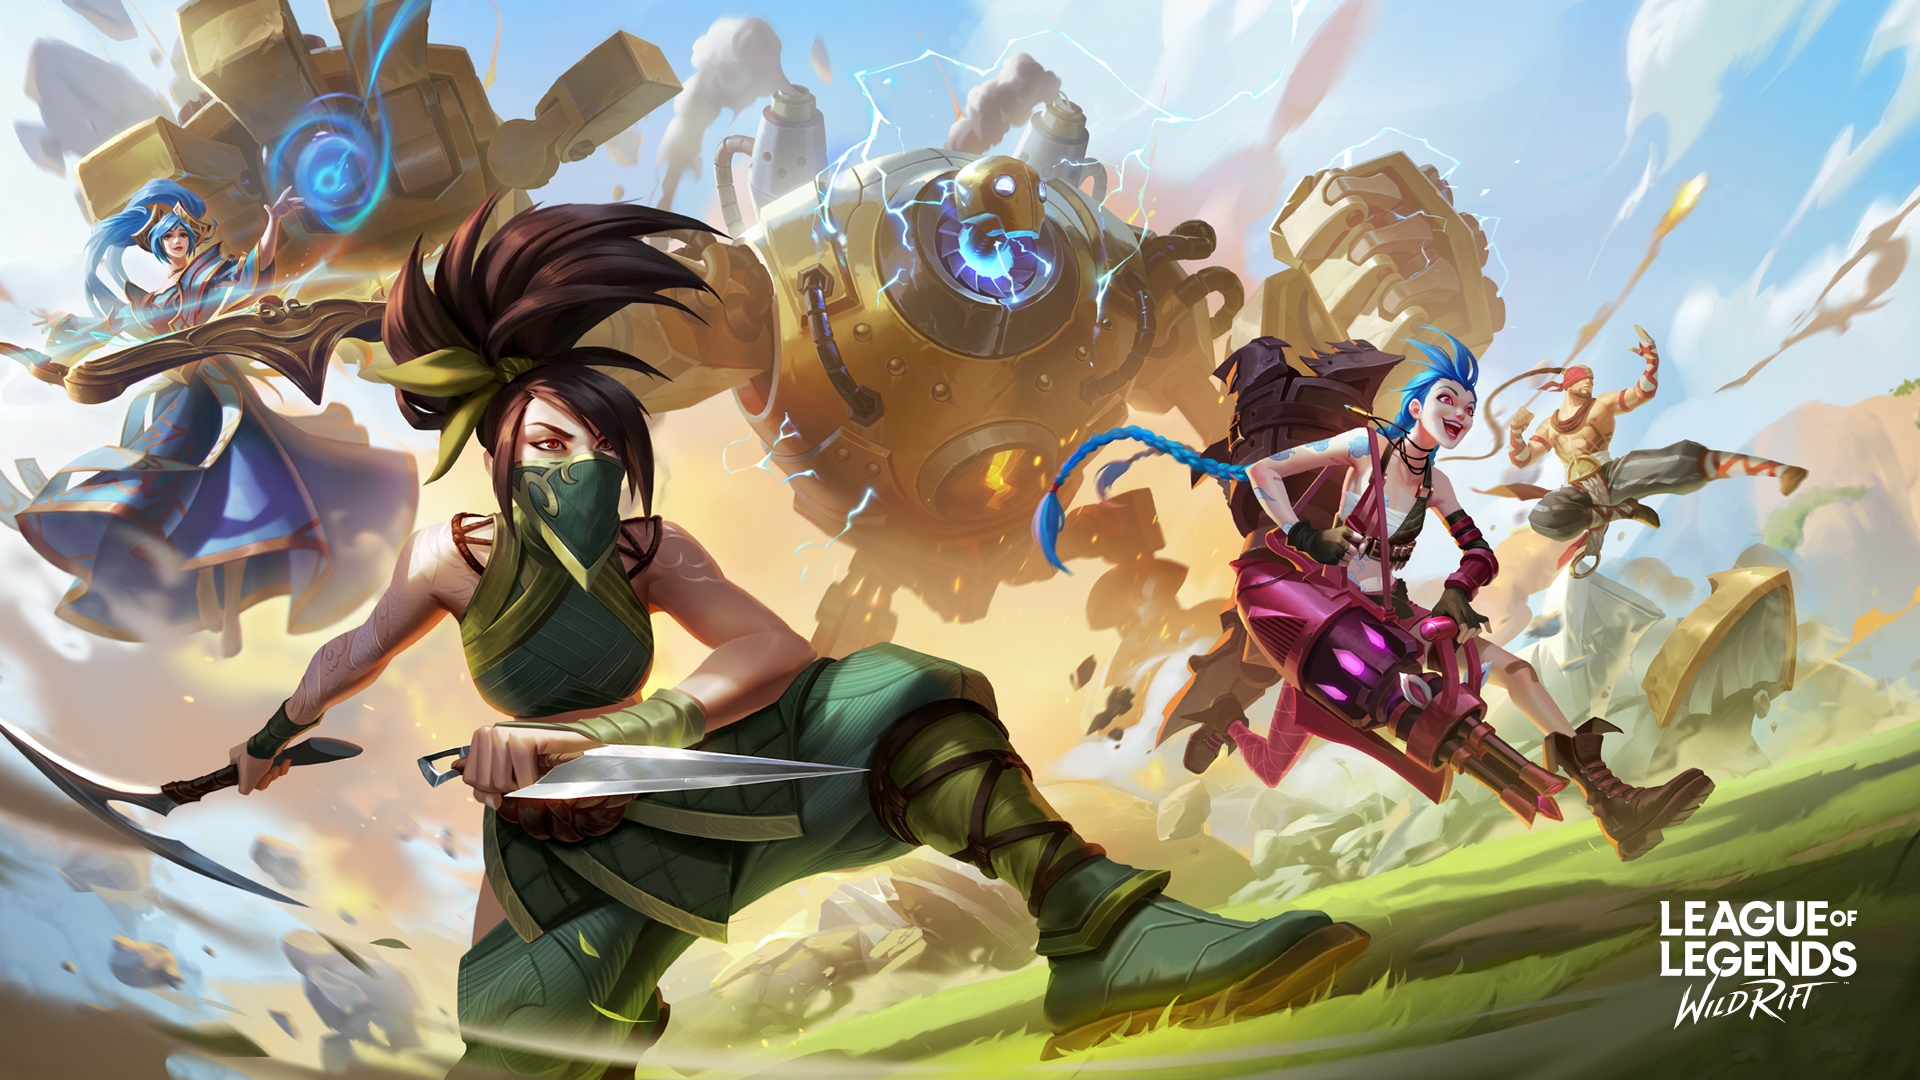 League of legends system requirements